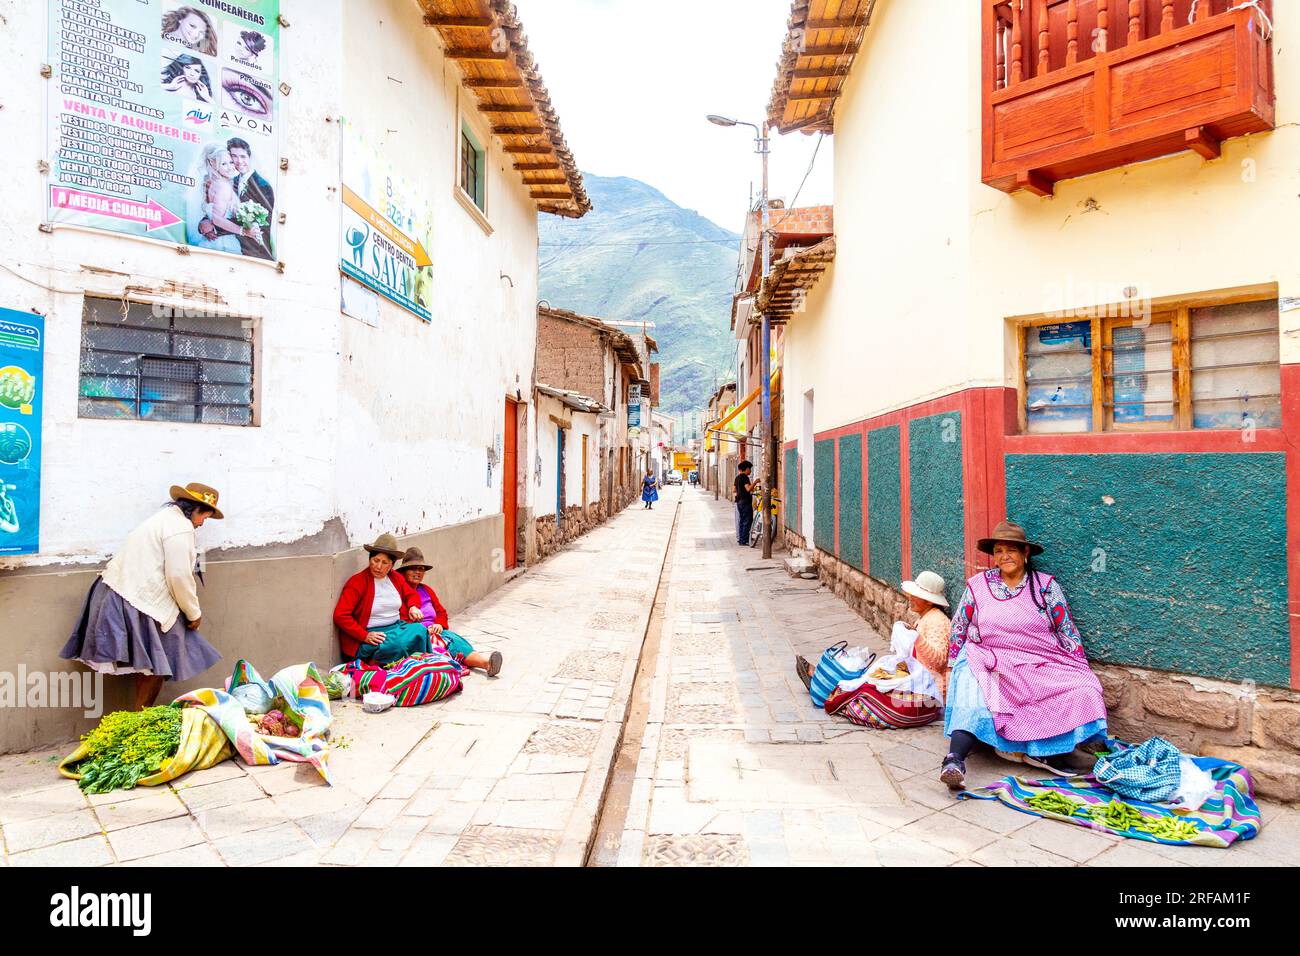 Peruvian woman sitting on the ground selling things in Pisac, Sacred Valley, Peru Stock Photo